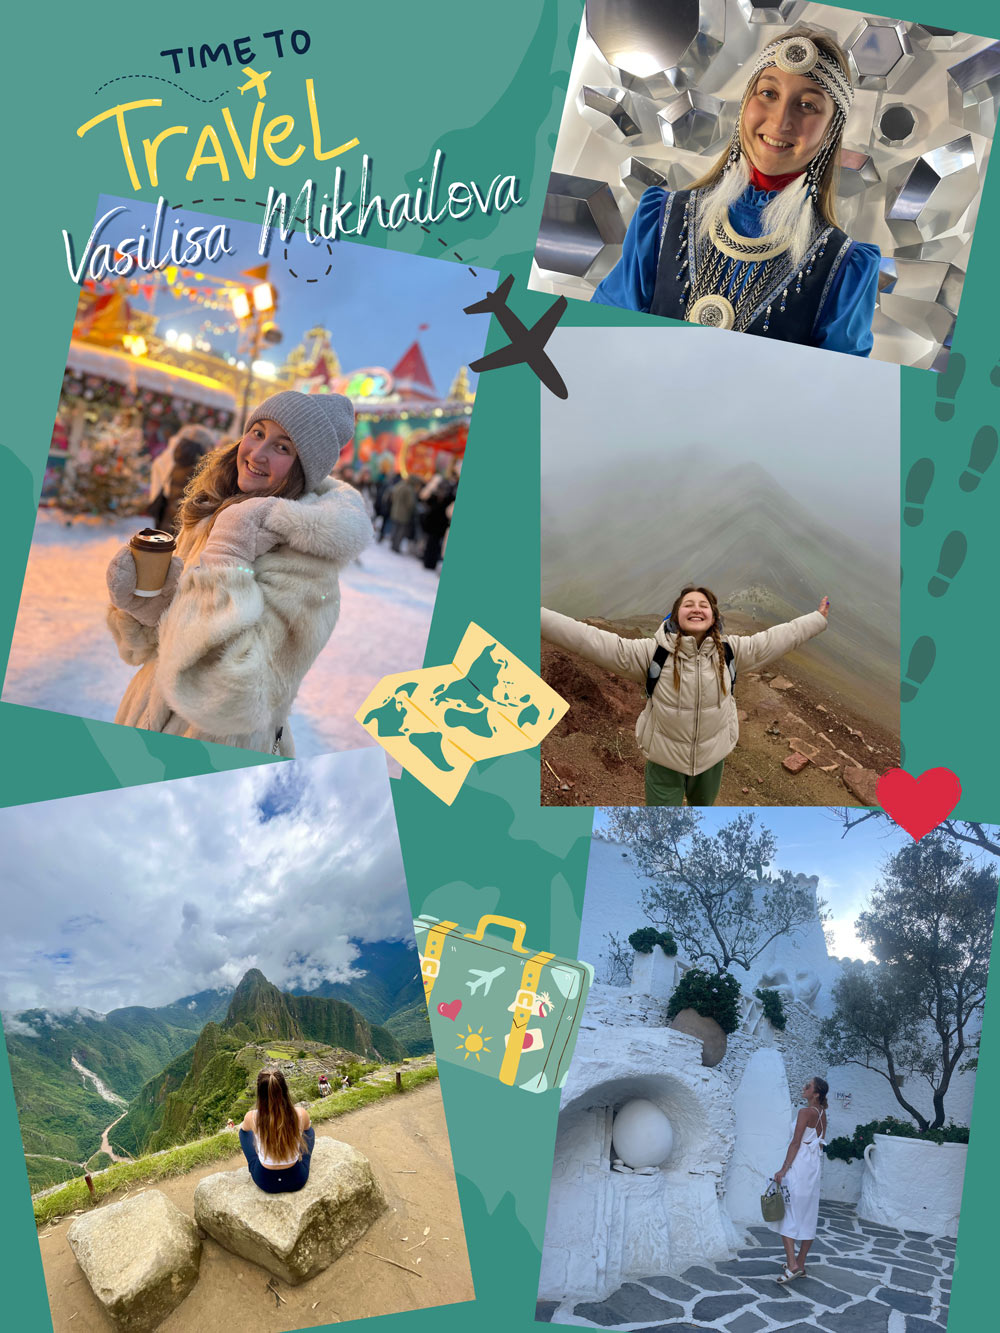 A graphic collage with travel icons and photos of Vasilisa's various travels